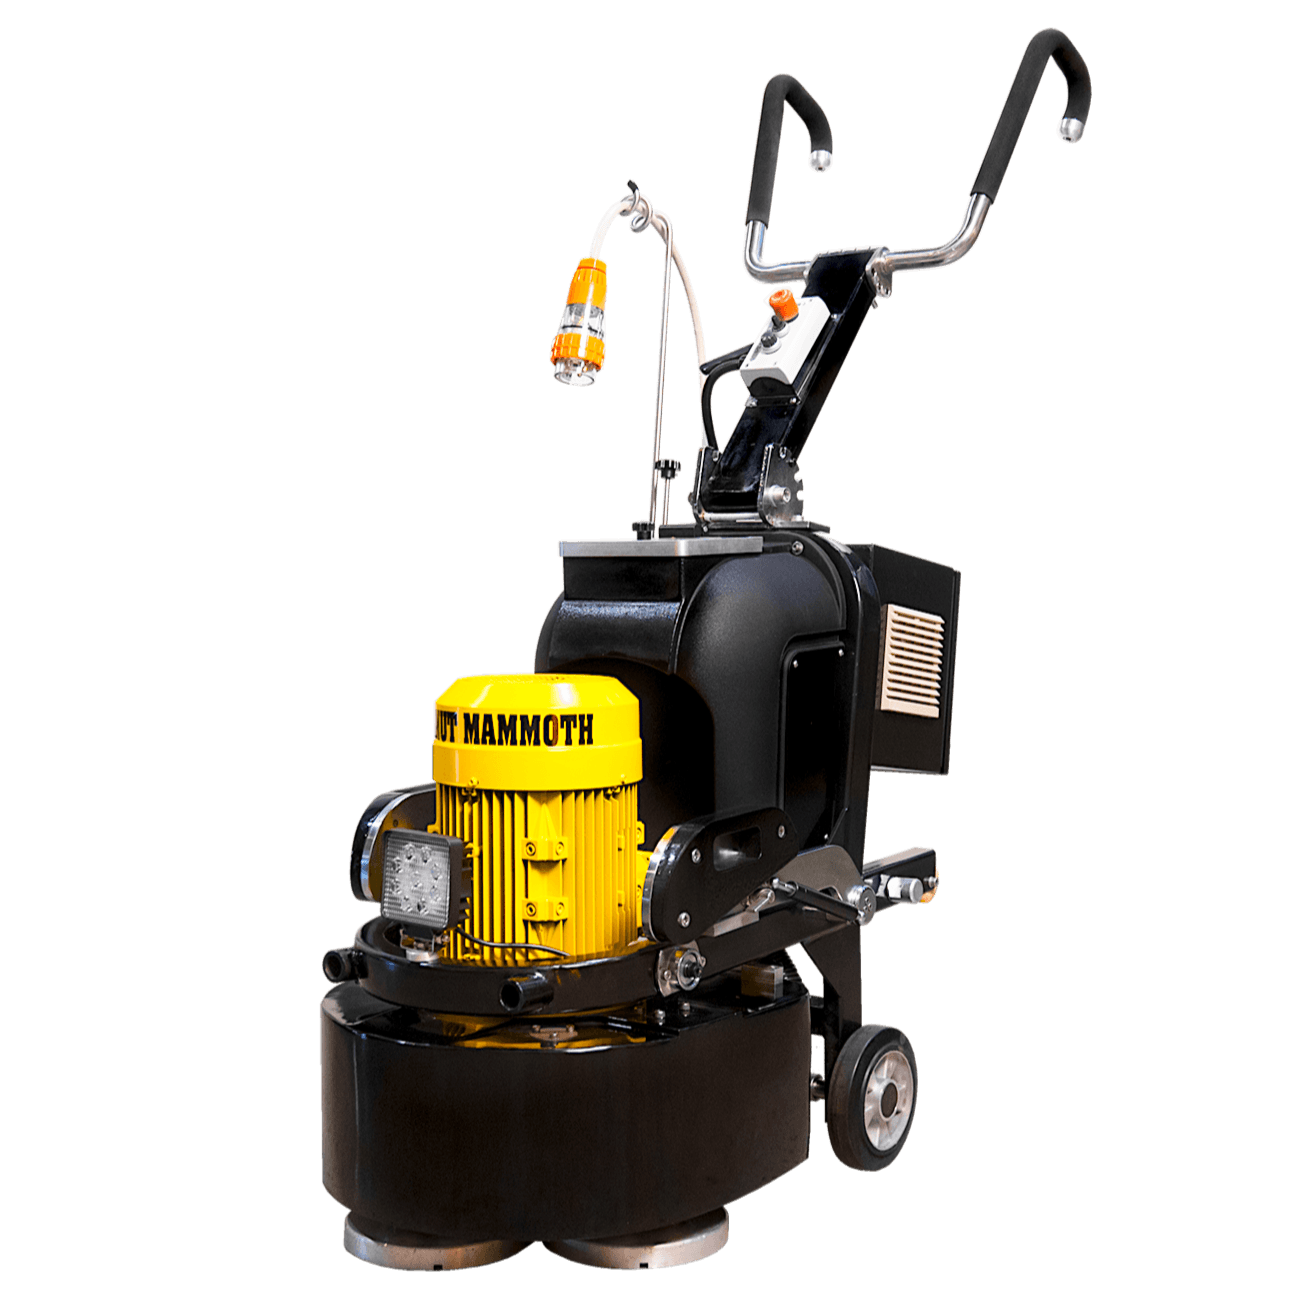 Peanut Mammoth Floor Grinder - Xtreme Polishing Systems, concrete grinders and polishers, cement grinders, concrete floor grinding